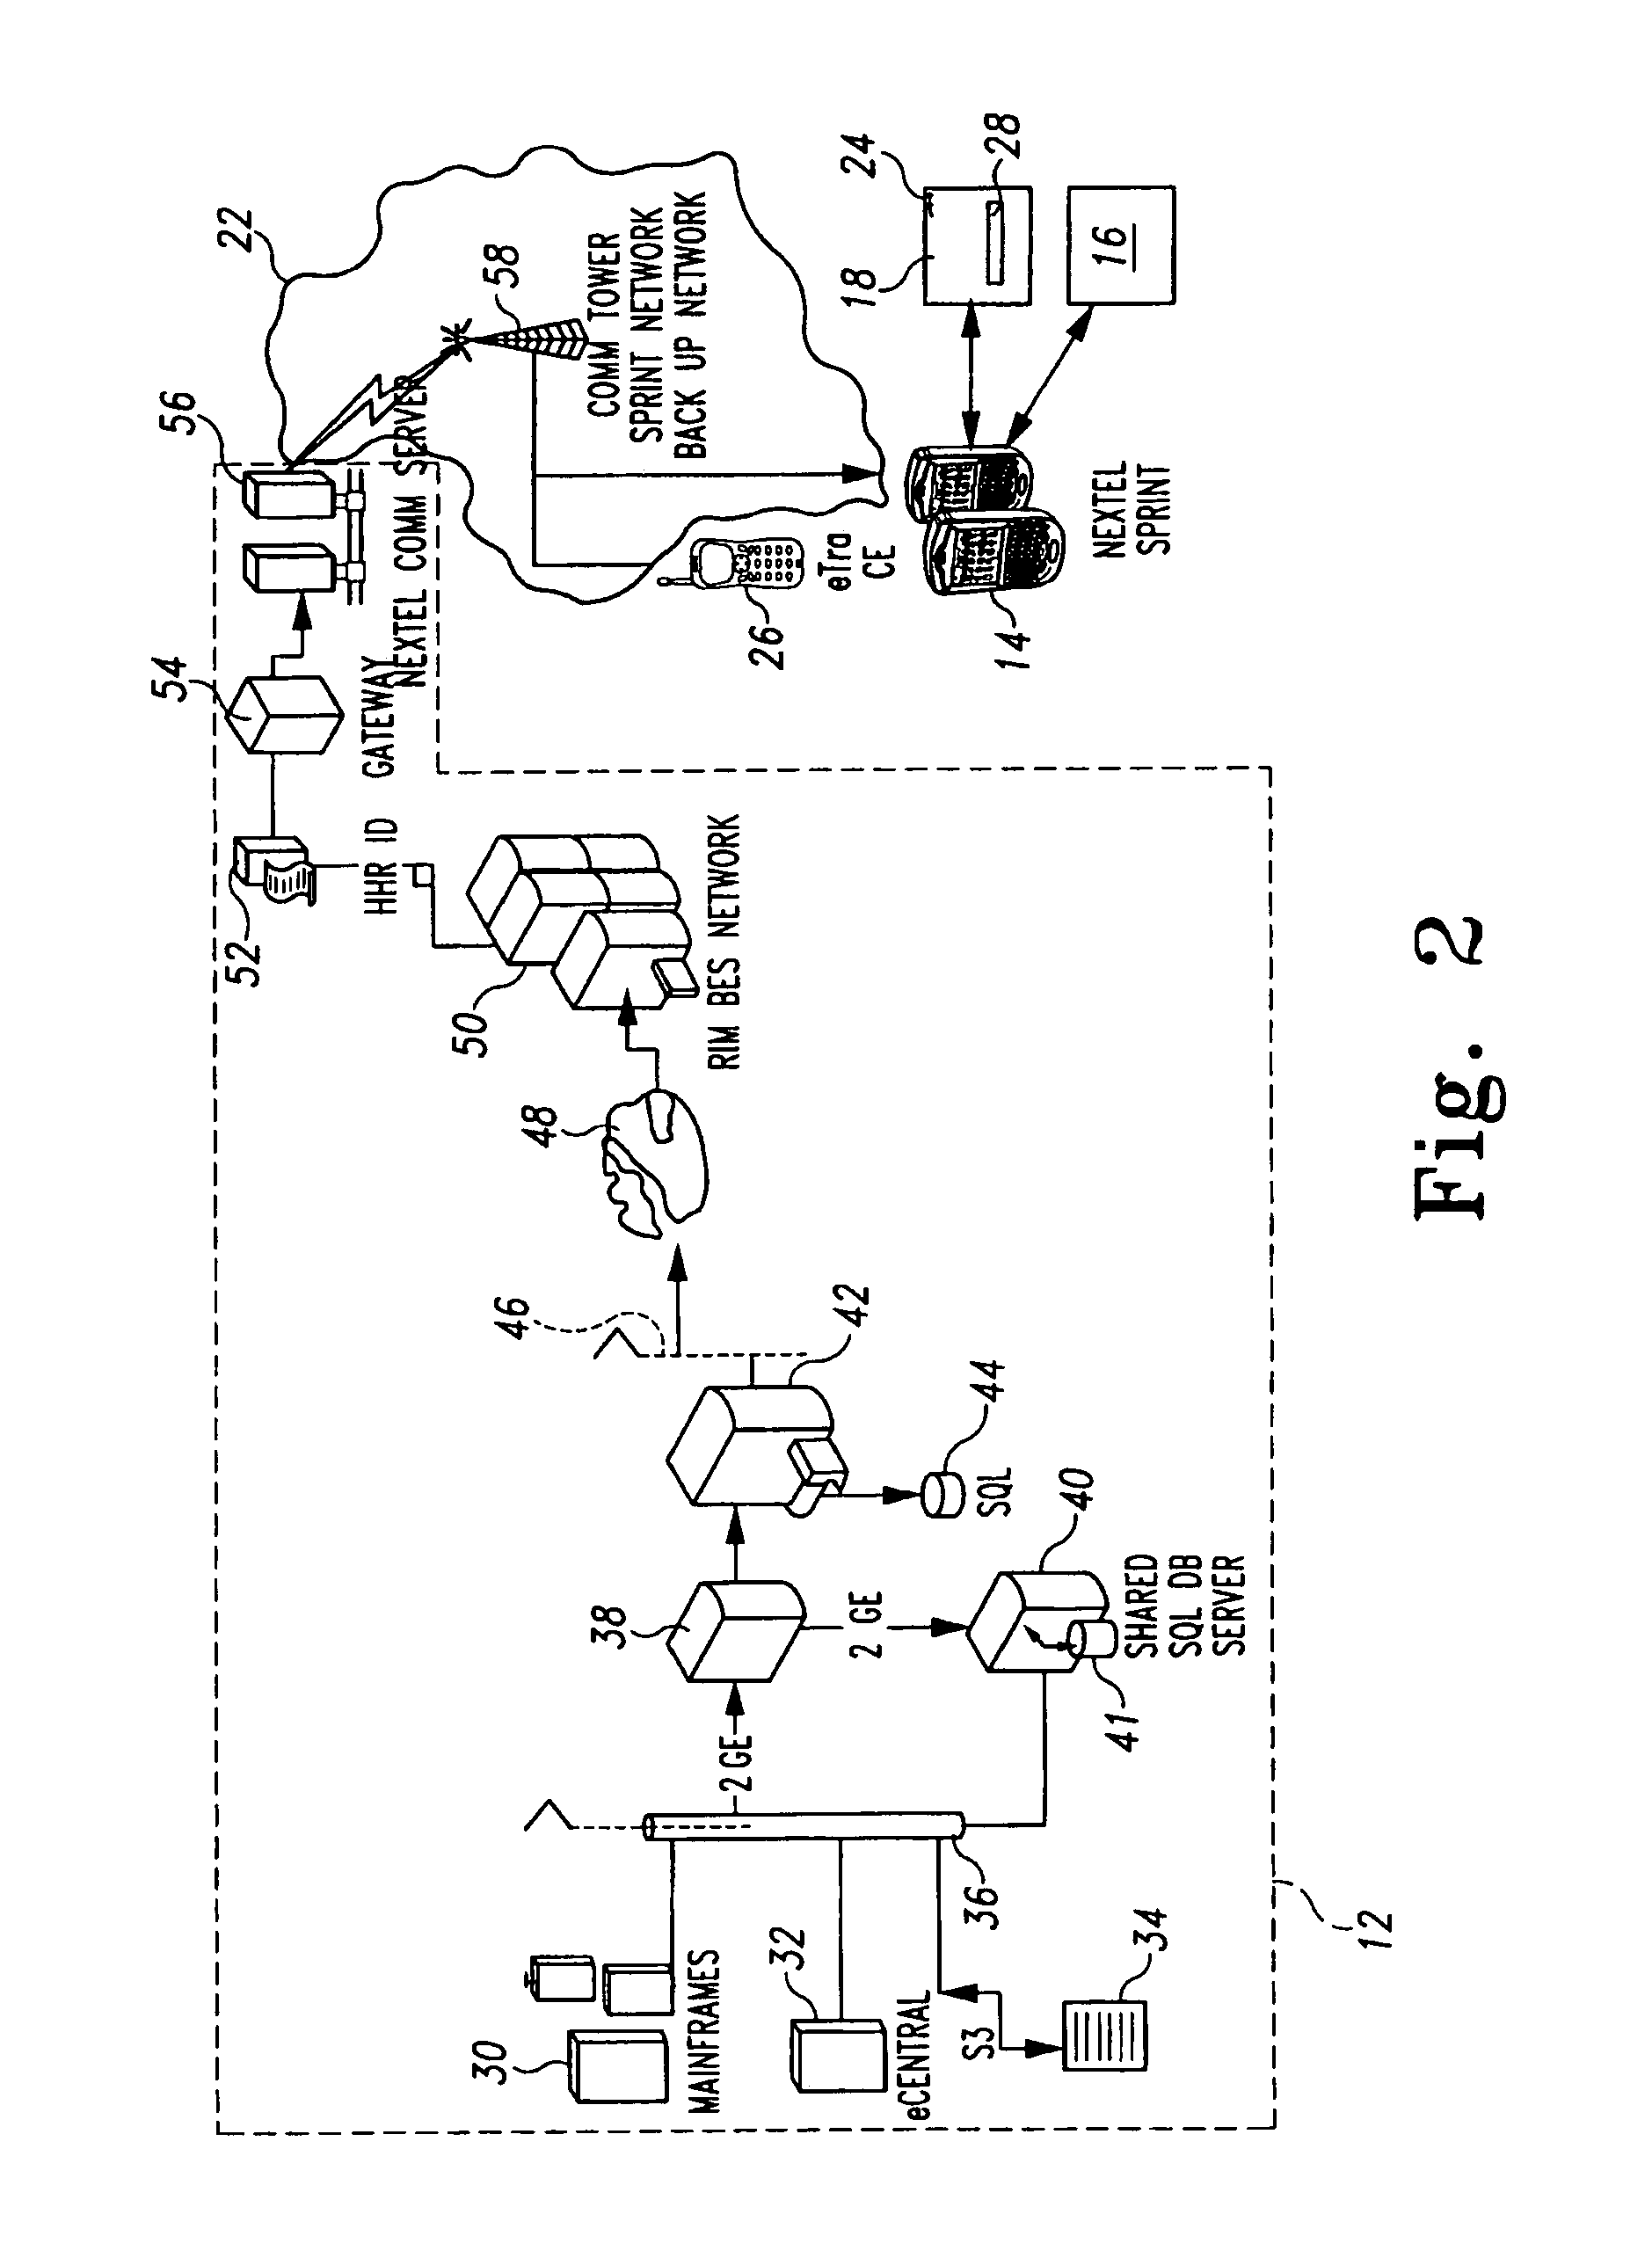 Method and device for providing location based content delivery